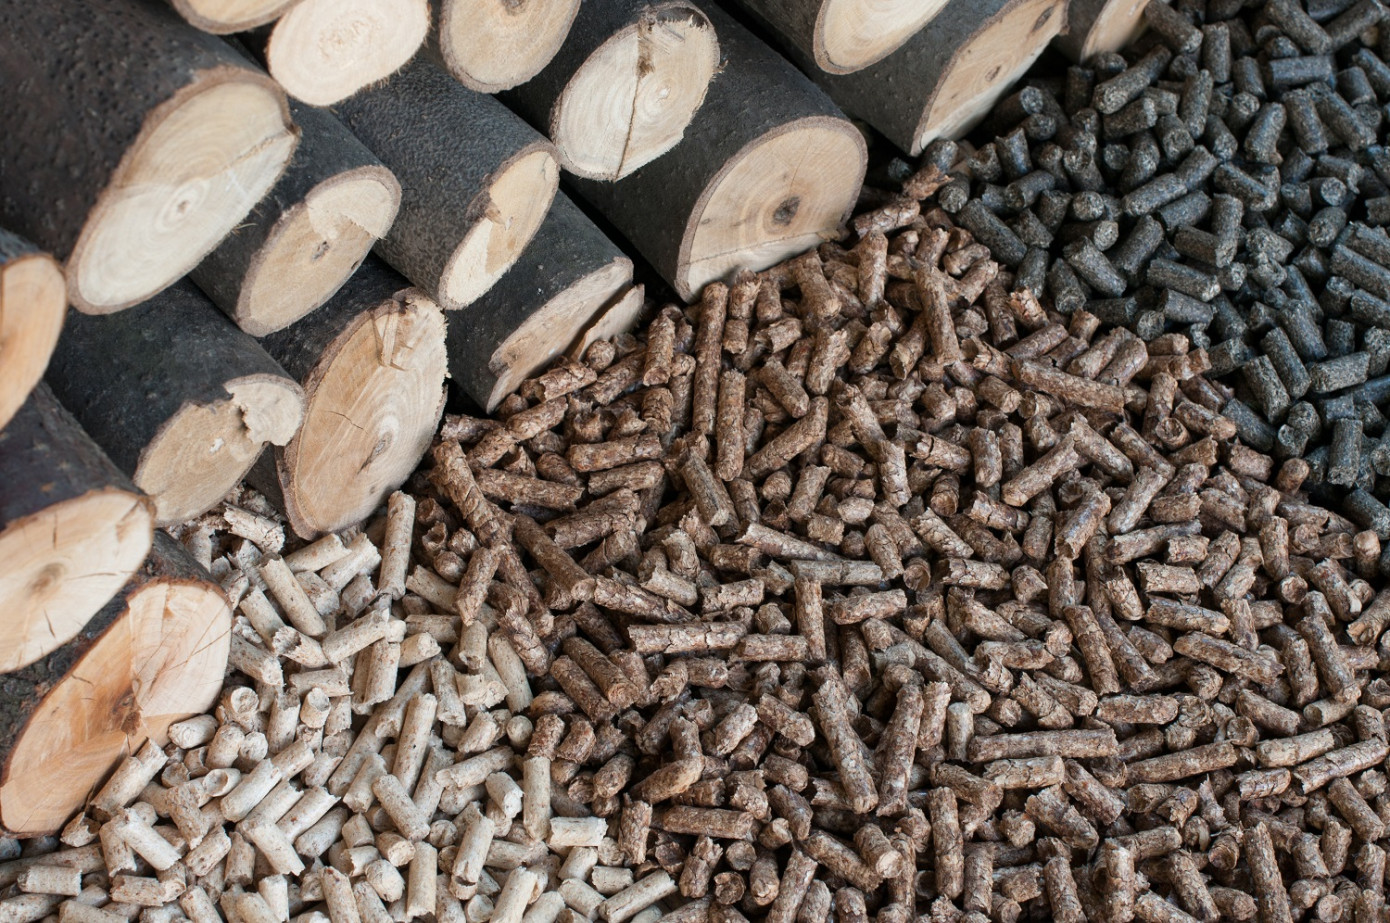 In April, price for wood pellets imported to South Korea contracts 7%